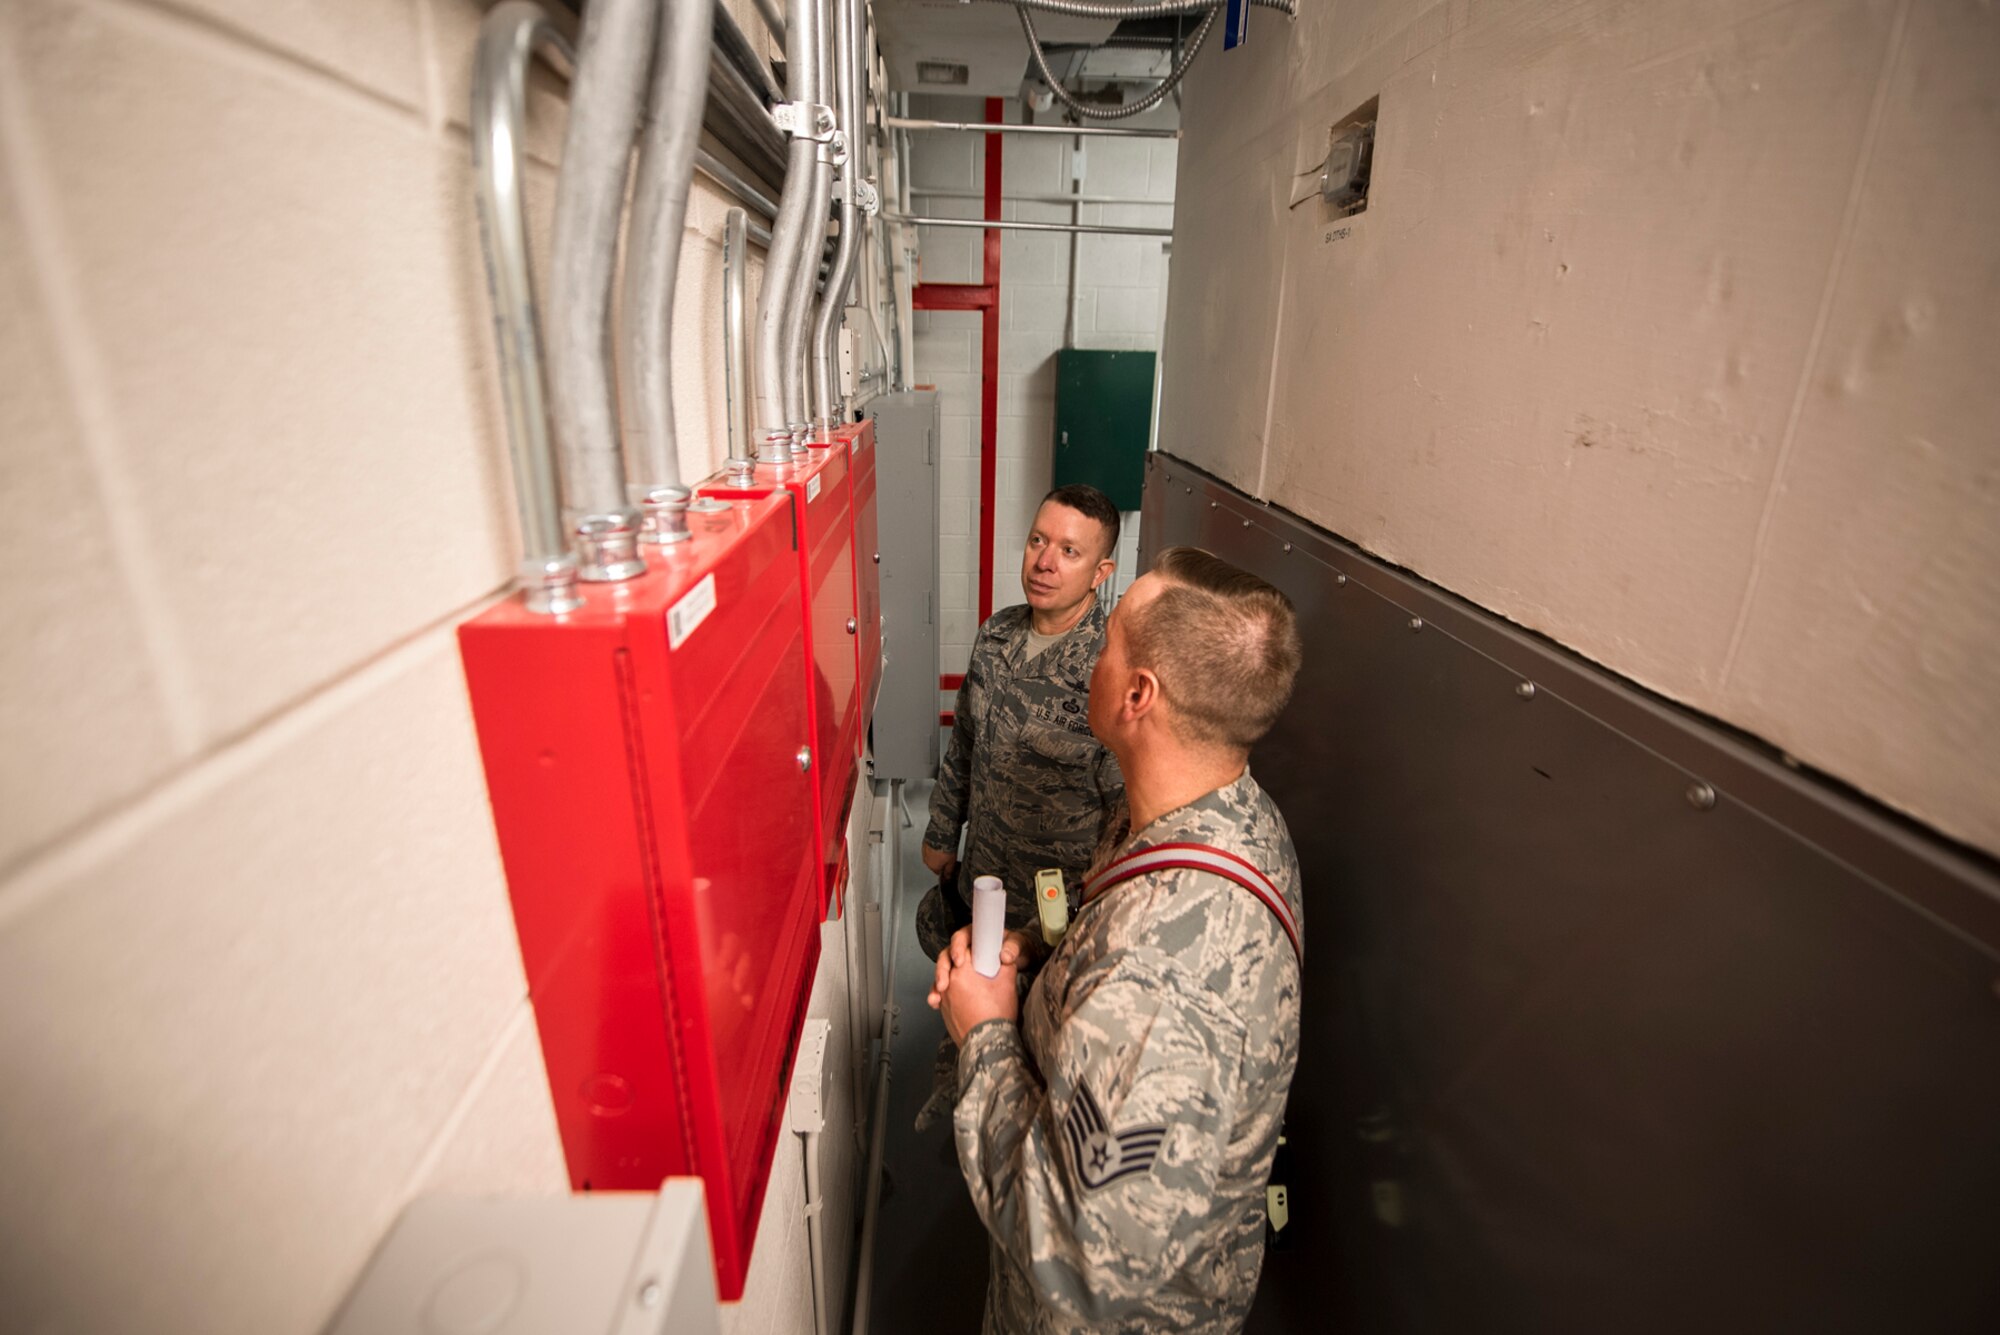 PETERSON AIR FORCE BASE, Colo. – Staff Sgt. Derrick Grinnell, 21st Civil Engineer Squadron fire inspector 2, explains to Chief Master Sgt. Brendan Criswell, Air Force Space Command command chief, the process of inspecting and assessing any fire hazards in a mechanical room at Peterson Air Force Base, Colo., May 11, 2017. Criswell hopes to expand his shadowing program and glimpse into the lives of enlisted members and their duties here on Peterson AFB, as well as other space wings in the command. (U.S. Air Force photo by Airman 1st Class Dennis Hoffman)